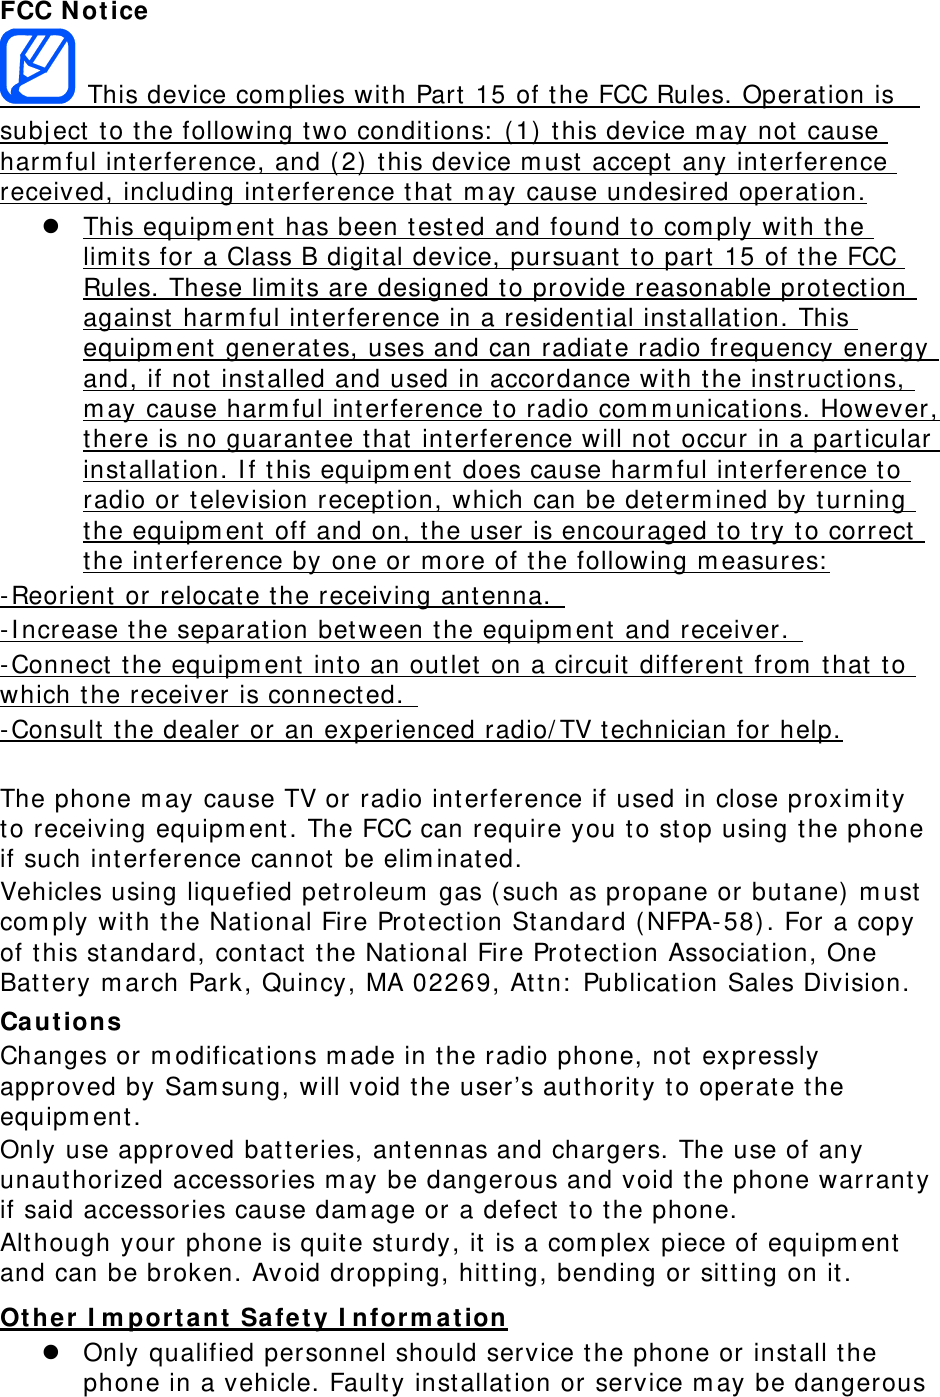 FCC N ot ice  This device com plies with Part  15 of t he FCC Rules. Operation is   subj ect  t o the following t wo conditions:  ( 1)  this device m ay not cause harm ful interference, and ( 2)  this device m ust  accept any interference received, including int erference that  m ay cause undesired operation.  This equipm ent has been tested and found t o com ply wit h the lim its for a Class B digital device, pursuant  t o part  15 of t he FCC Rules. These lim its are designed t o provide reasonable prot ection against harm ful interference in a resident ial installation. This equipm ent  generates, uses and can radiate radio frequency energy and, if not installed and used in accordance wit h t he instructions, m ay cause harm ful int erference to radio com m unicat ions. However, there is no guarant ee that  interference will not  occur in a particular installation. I f t his equipm ent  does cause harm ful interference t o radio or television reception, which can be determ ined by turning the equipm ent  off and on, t he user is encouraged t o t ry t o correct  the int erference by one or m ore of t he following m easures:  - Reorient  or relocate t he receiving ant enna.   - I ncrease t he separation between t he equipm ent  and receiver.   - Connect t he equipm ent  into an outlet on a circuit different from  t hat to which t he receiver is connect ed.   - Consult  t he dealer or an experienced radio/ TV technician for help.  The phone m ay cause TV or radio int erference if used in close proxim it y to receiving equipm ent . The FCC can require you to stop using the phone if such int erference cannot be elim inated. Vehicles using liquefied pet roleum  gas ( such as propane or but ane)  m ust  com ply wit h the Nat ional Fire Protection St andard ( NFPA- 58) . For a copy of t his standard, cont act  t he Nat ional Fire Protection Association, One Battery m arch Park, Quincy, MA 02269, At t n:  Publication Sales Division. Ca ut ion s Changes or m odificat ions m ade in t he radio phone, not  expressly approved by Sam sung, will void the user’s authority to operate t he equipm ent. Only use approved batt eries, ant ennas and chargers. The use of any unauthorized accessories m ay be dangerous and void t he phone warrant y if said accessories cause dam age or a defect  t o the phone. Alt hough your phone is quite sturdy, it is a com plex piece of equipm ent  and can be broken. Avoid dropping, hitting, bending or sitt ing on it . Ot he r I m por tant Safe t y I nform ation  Only qualified personnel should service the phone or install the phone in a vehicle. Faulty installation or service m ay be dangerous 